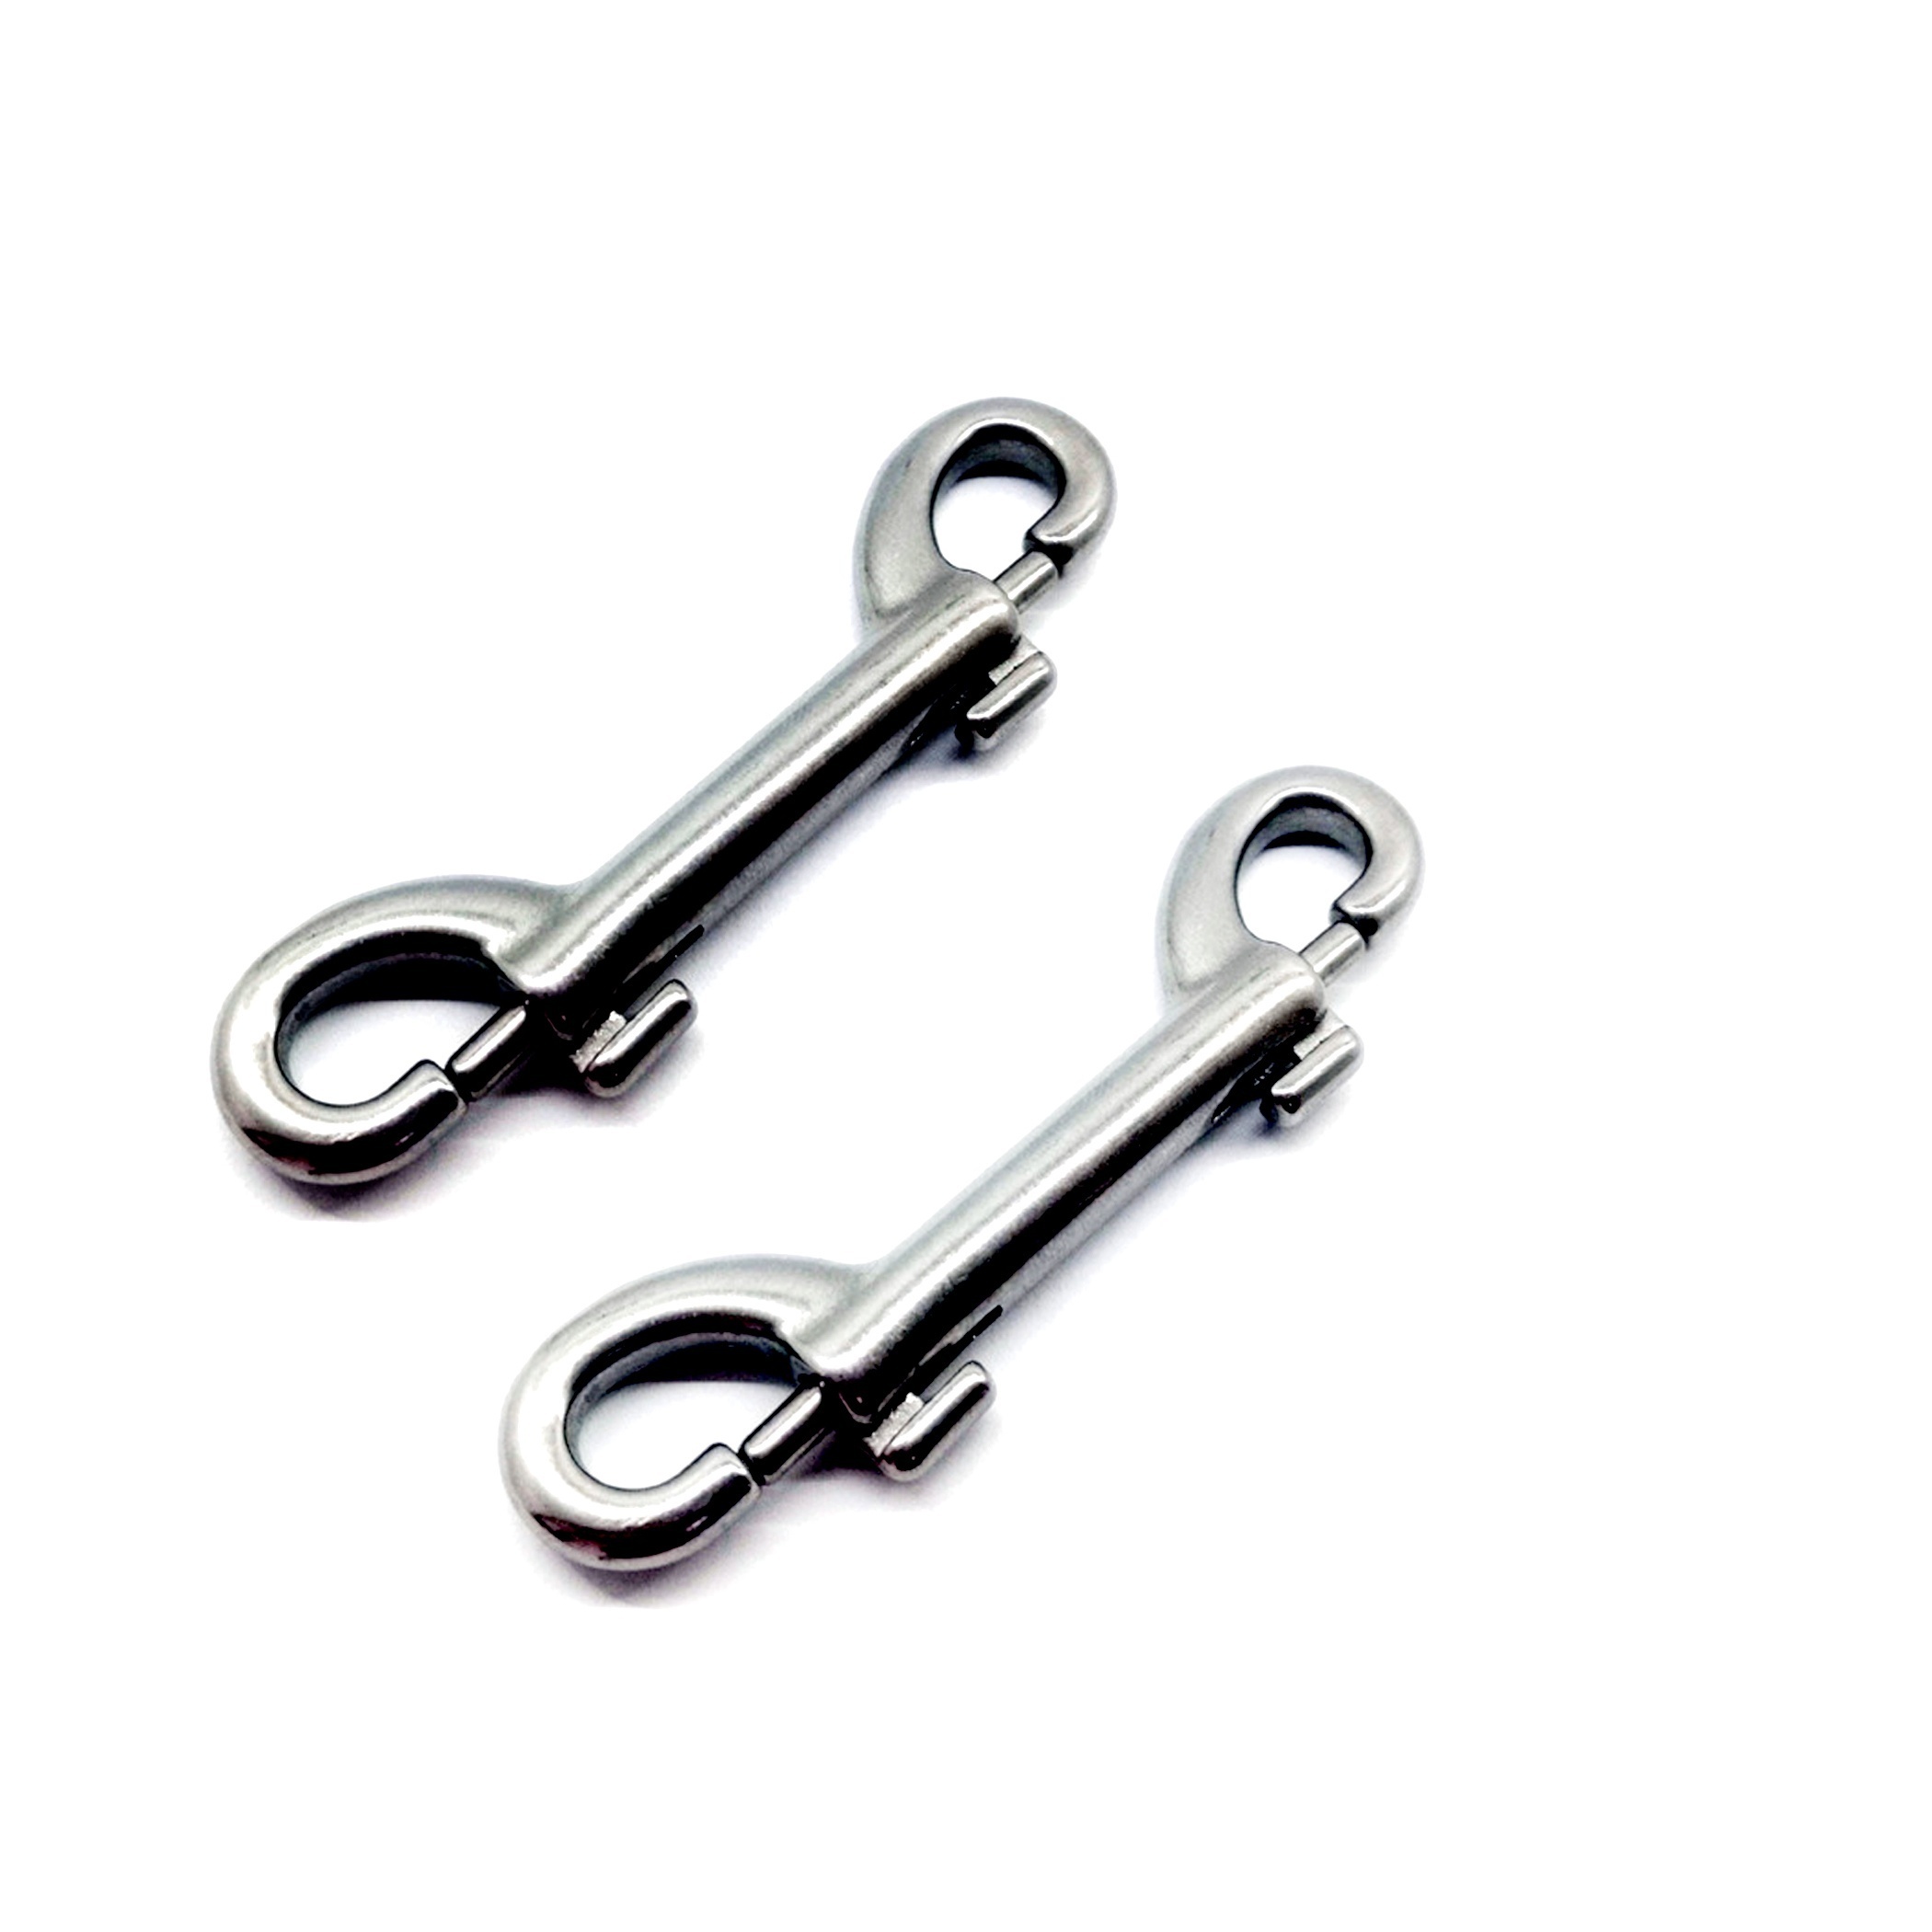 Stainless Steel Double End Snap Hook B-shape Spring Hook Heavy Duty Bolt  Trigger Pet Leashes Clip Submersible Yacht Accessories - AliExpress